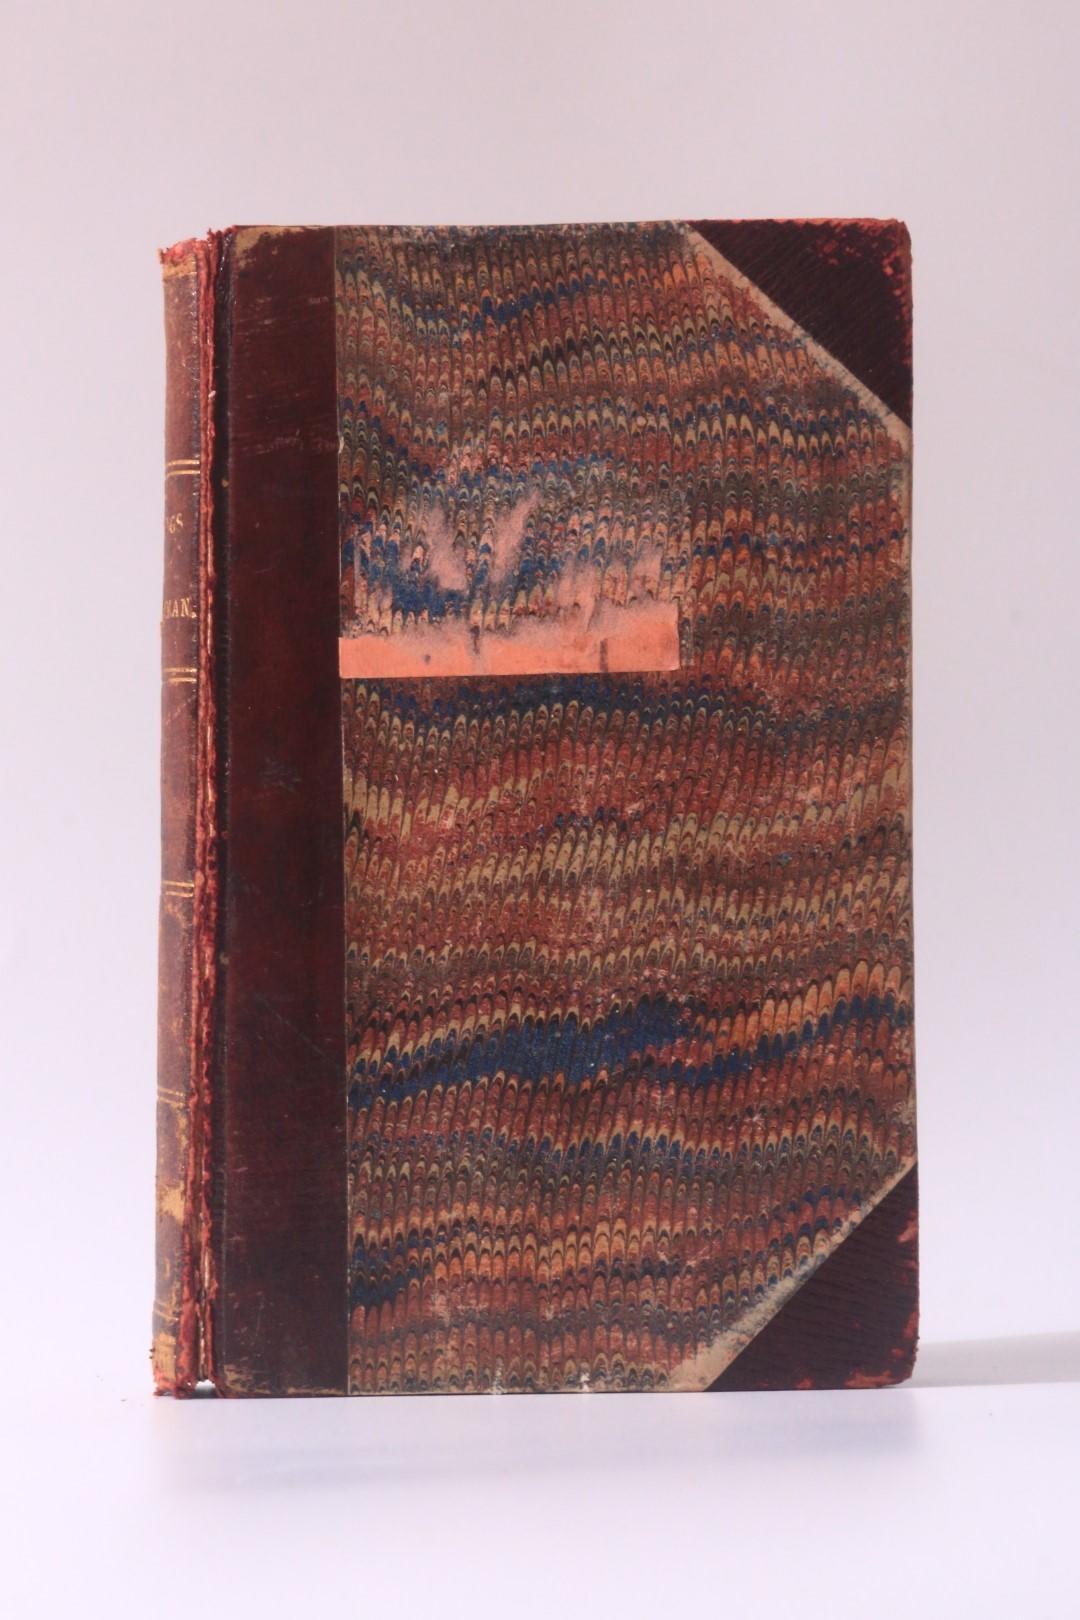 Anonymous - The Pryings of a Postman - Saunders & Otley, 1845, First Edition.